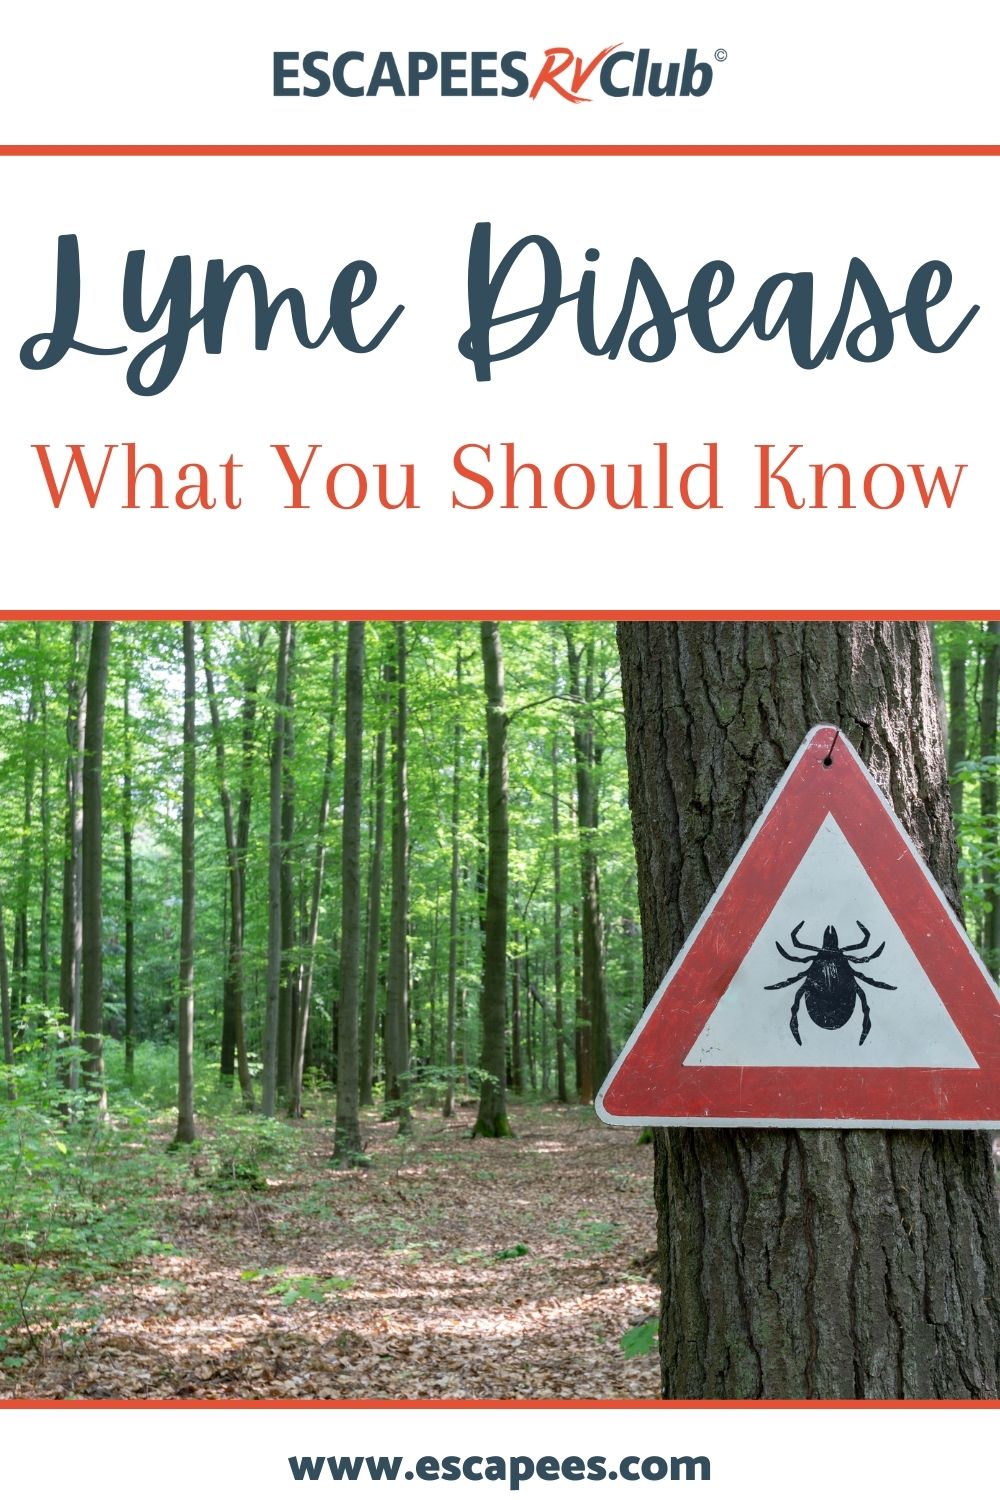 Once Bitten, Twice Shy: What You Should Know About Lyme Disease 45